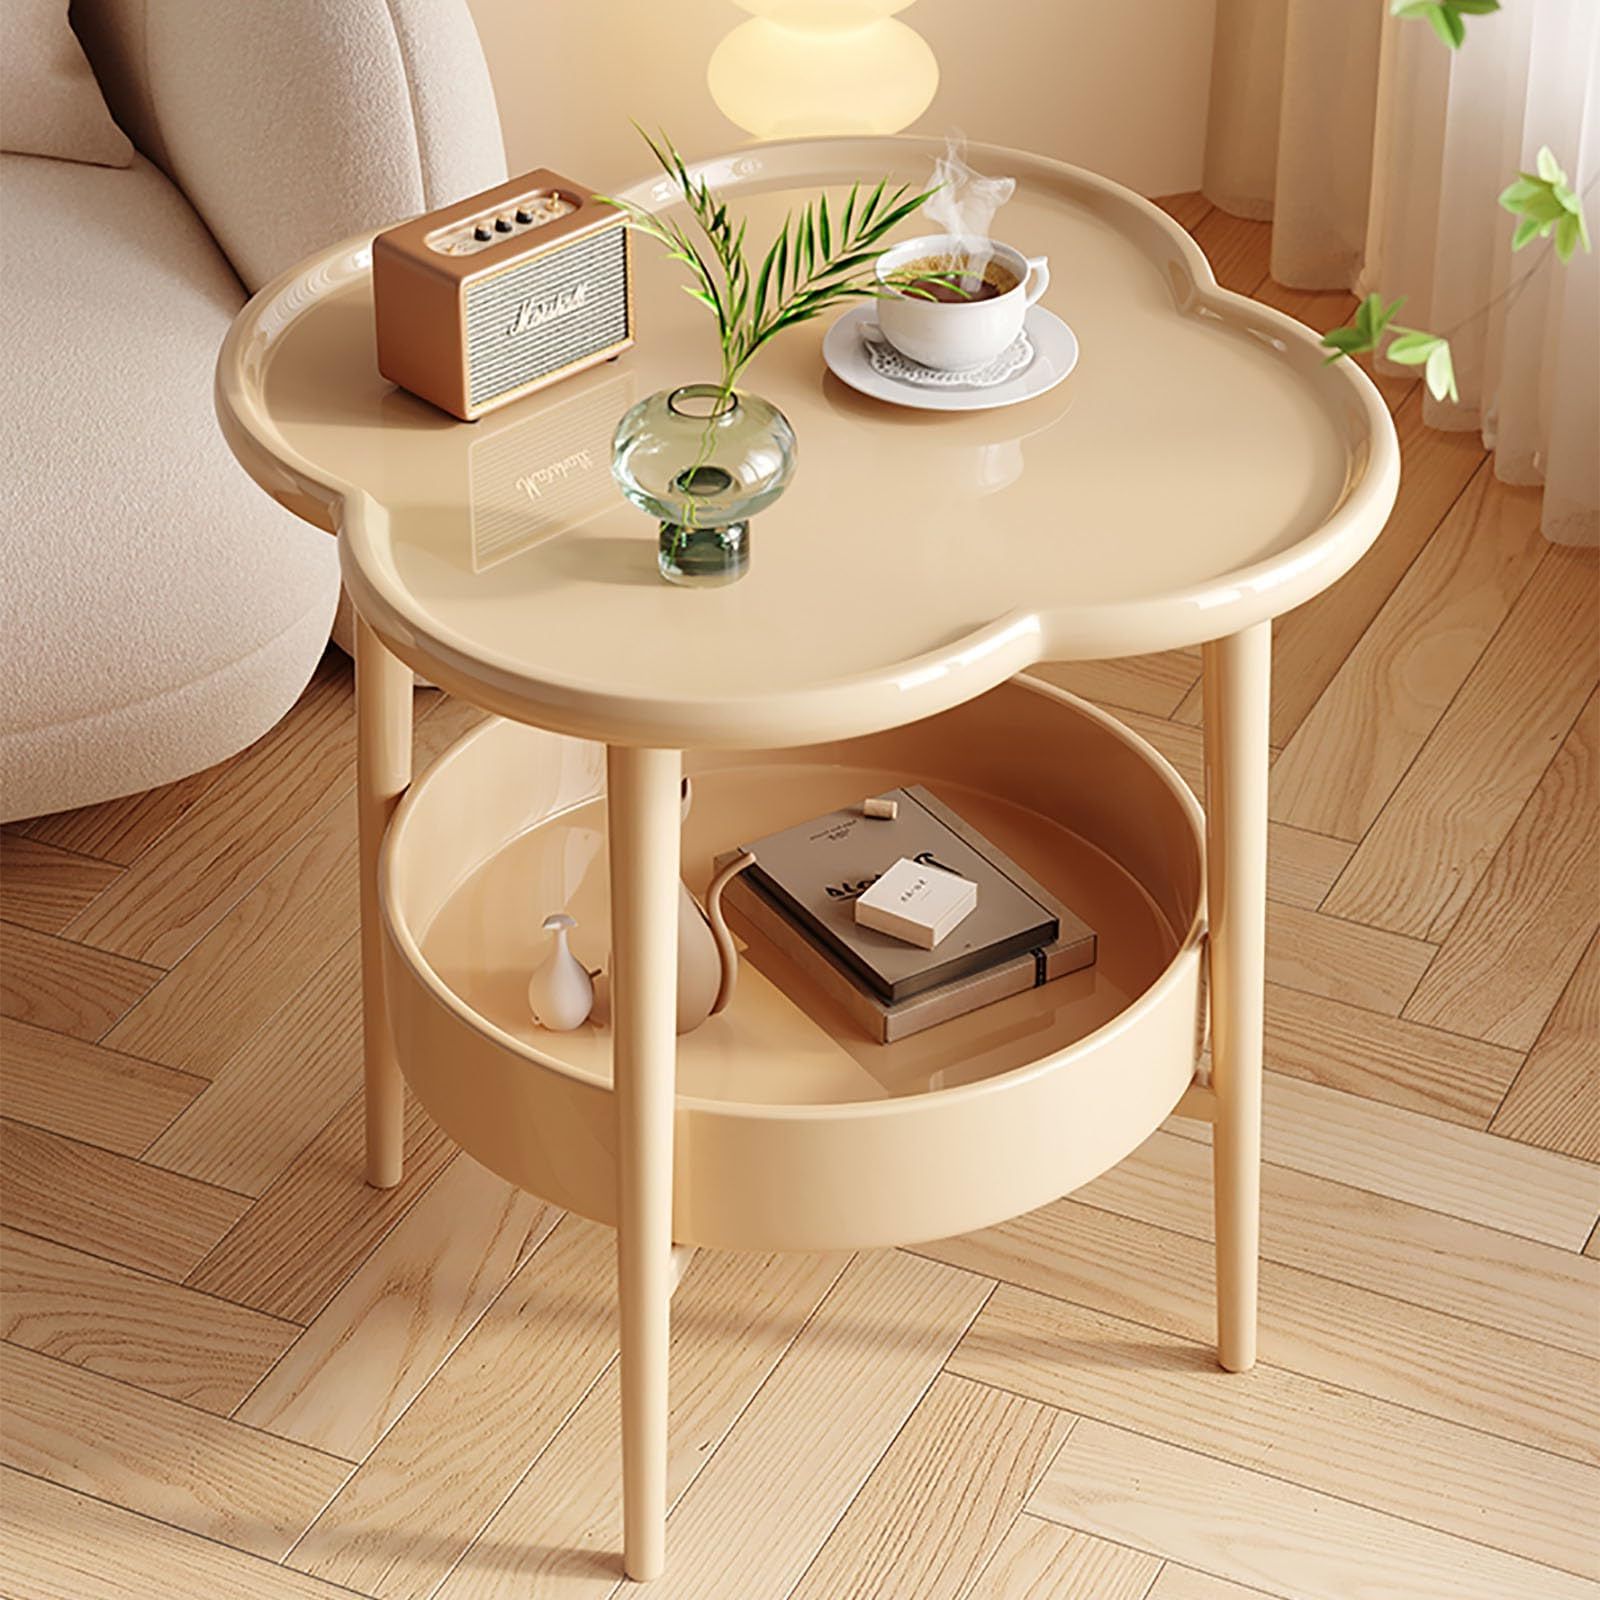 Most Recent Amazon: Whyatt Nightstand Side Table, Compact Coffee Table For Small  Spaces, Decorative Side Tables For Bedrooms, Balconies And Living Rooms  (size : A1) : Home & Kitchen Intended For Coffee Tables For Balconies (Photo 3 of 10)